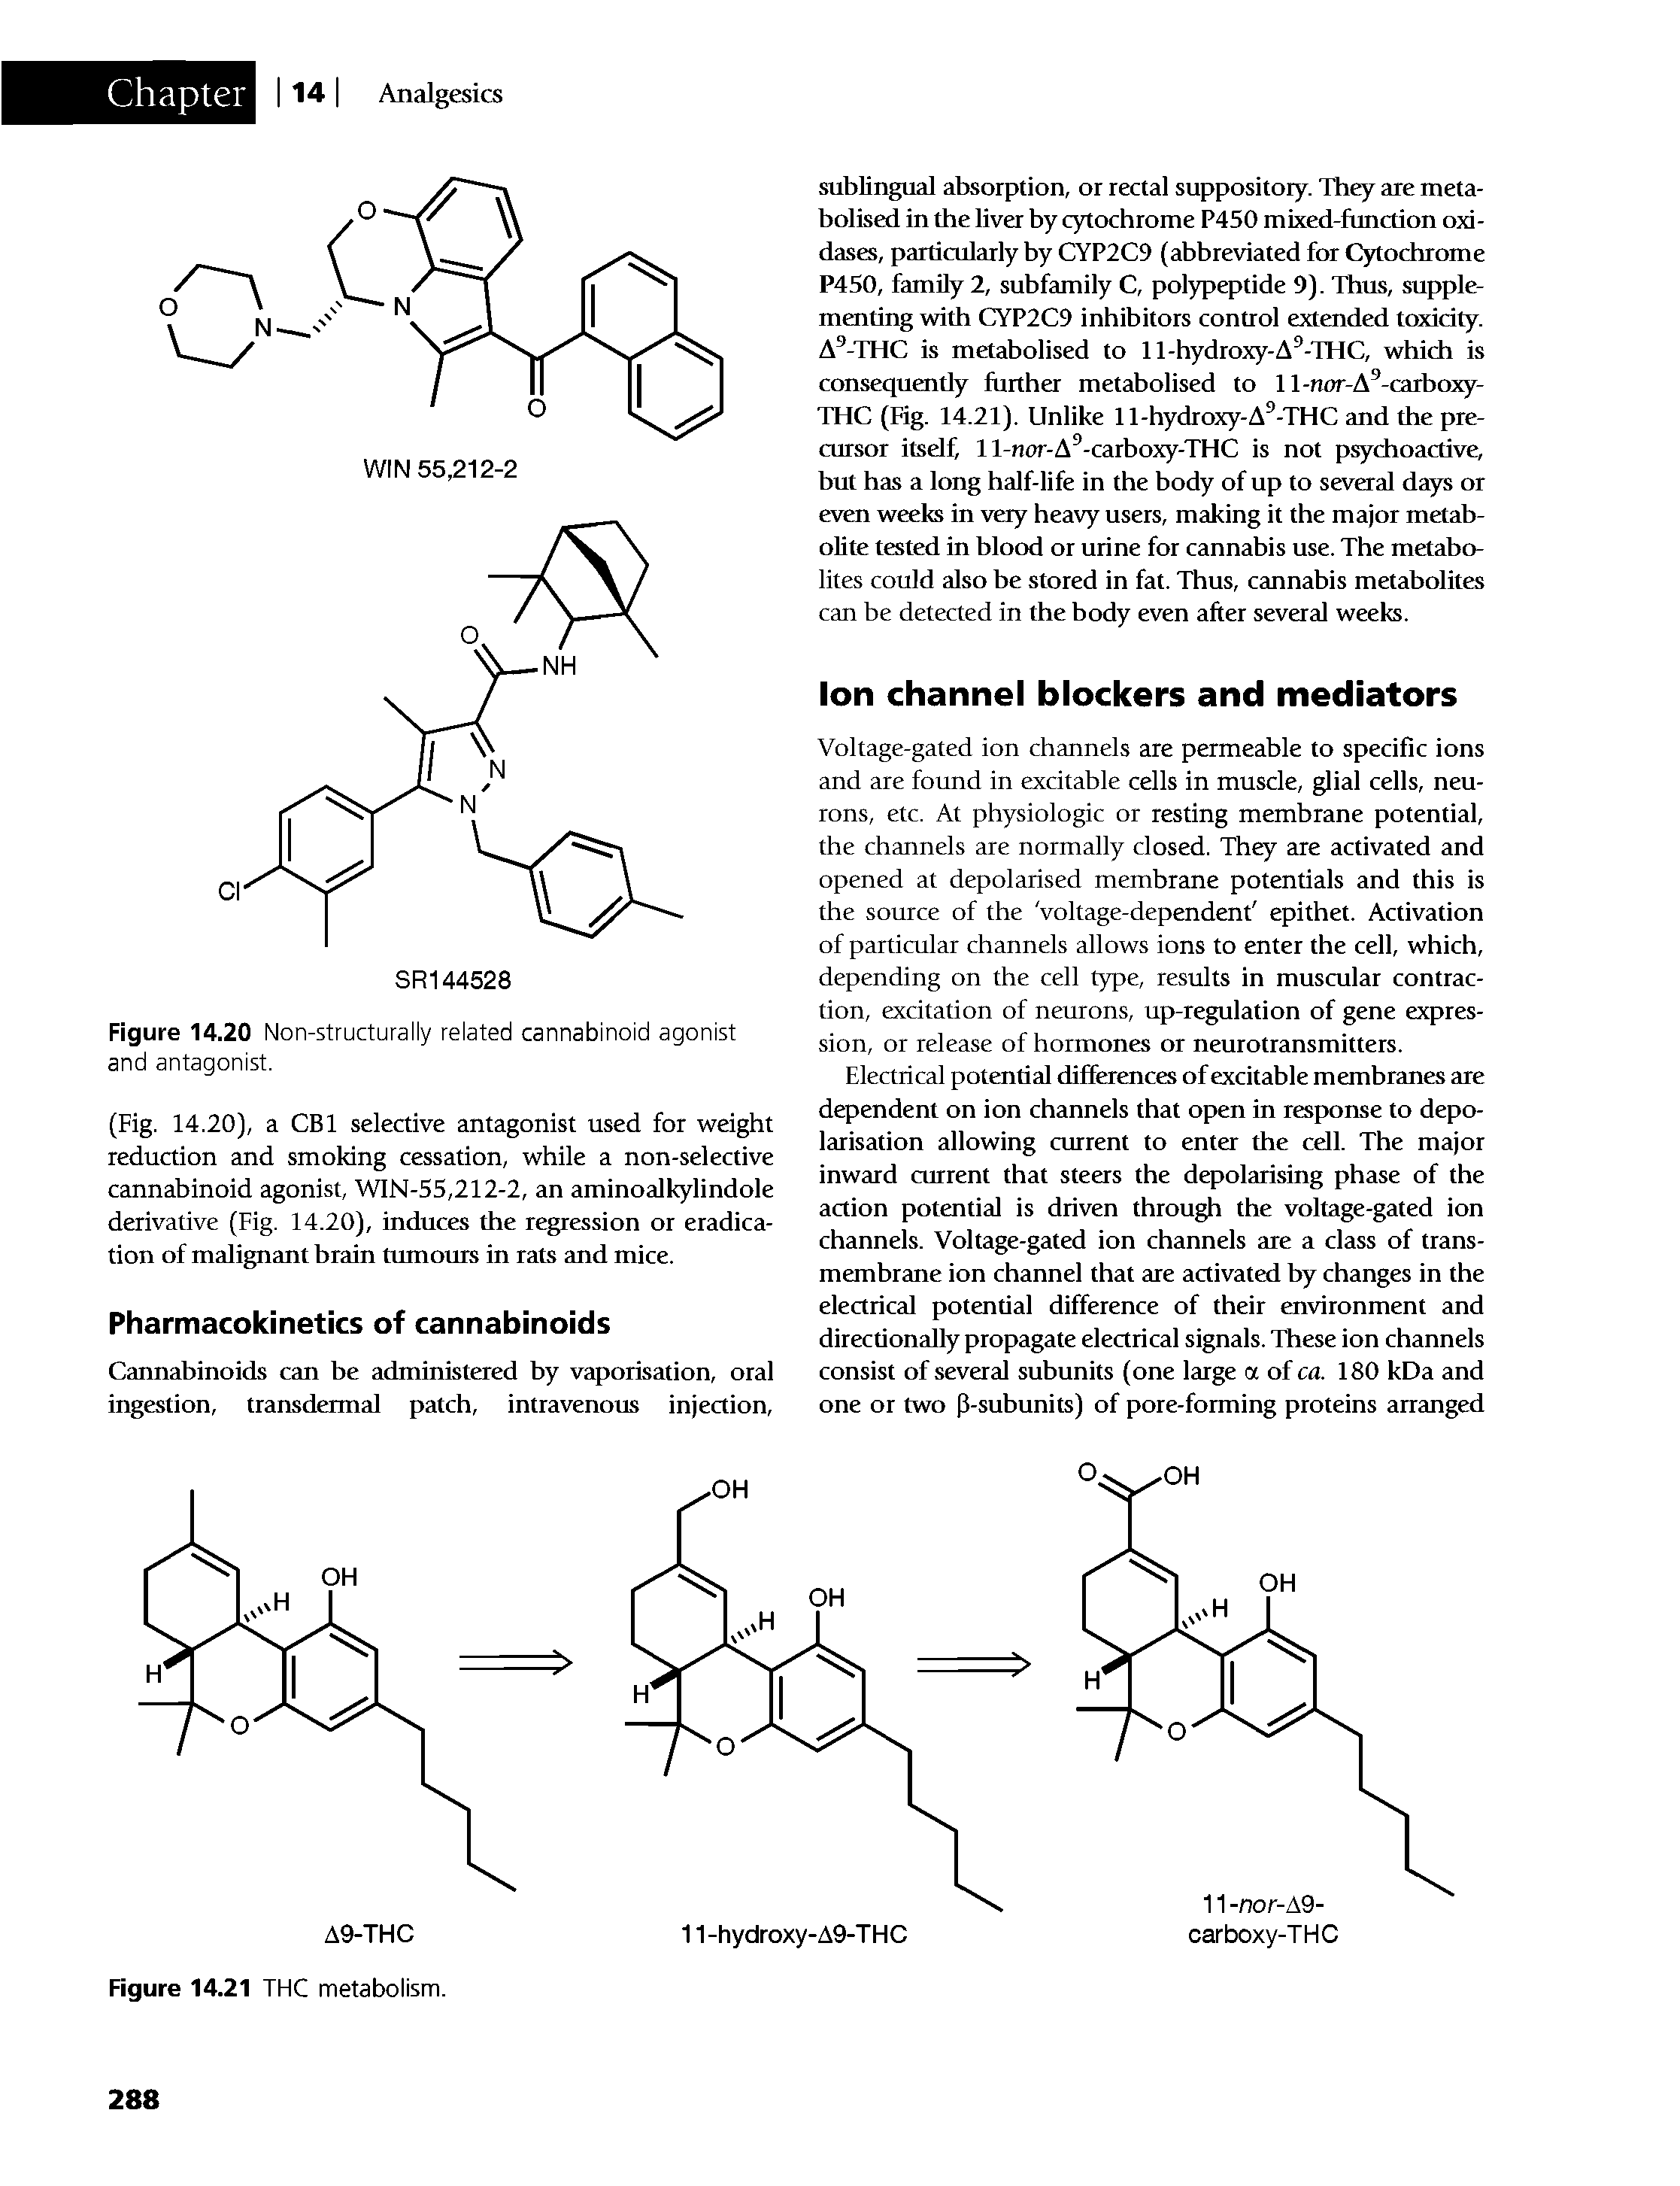 Figure 14.20 Non-structurally related cannabinoid agonist and antagonist.